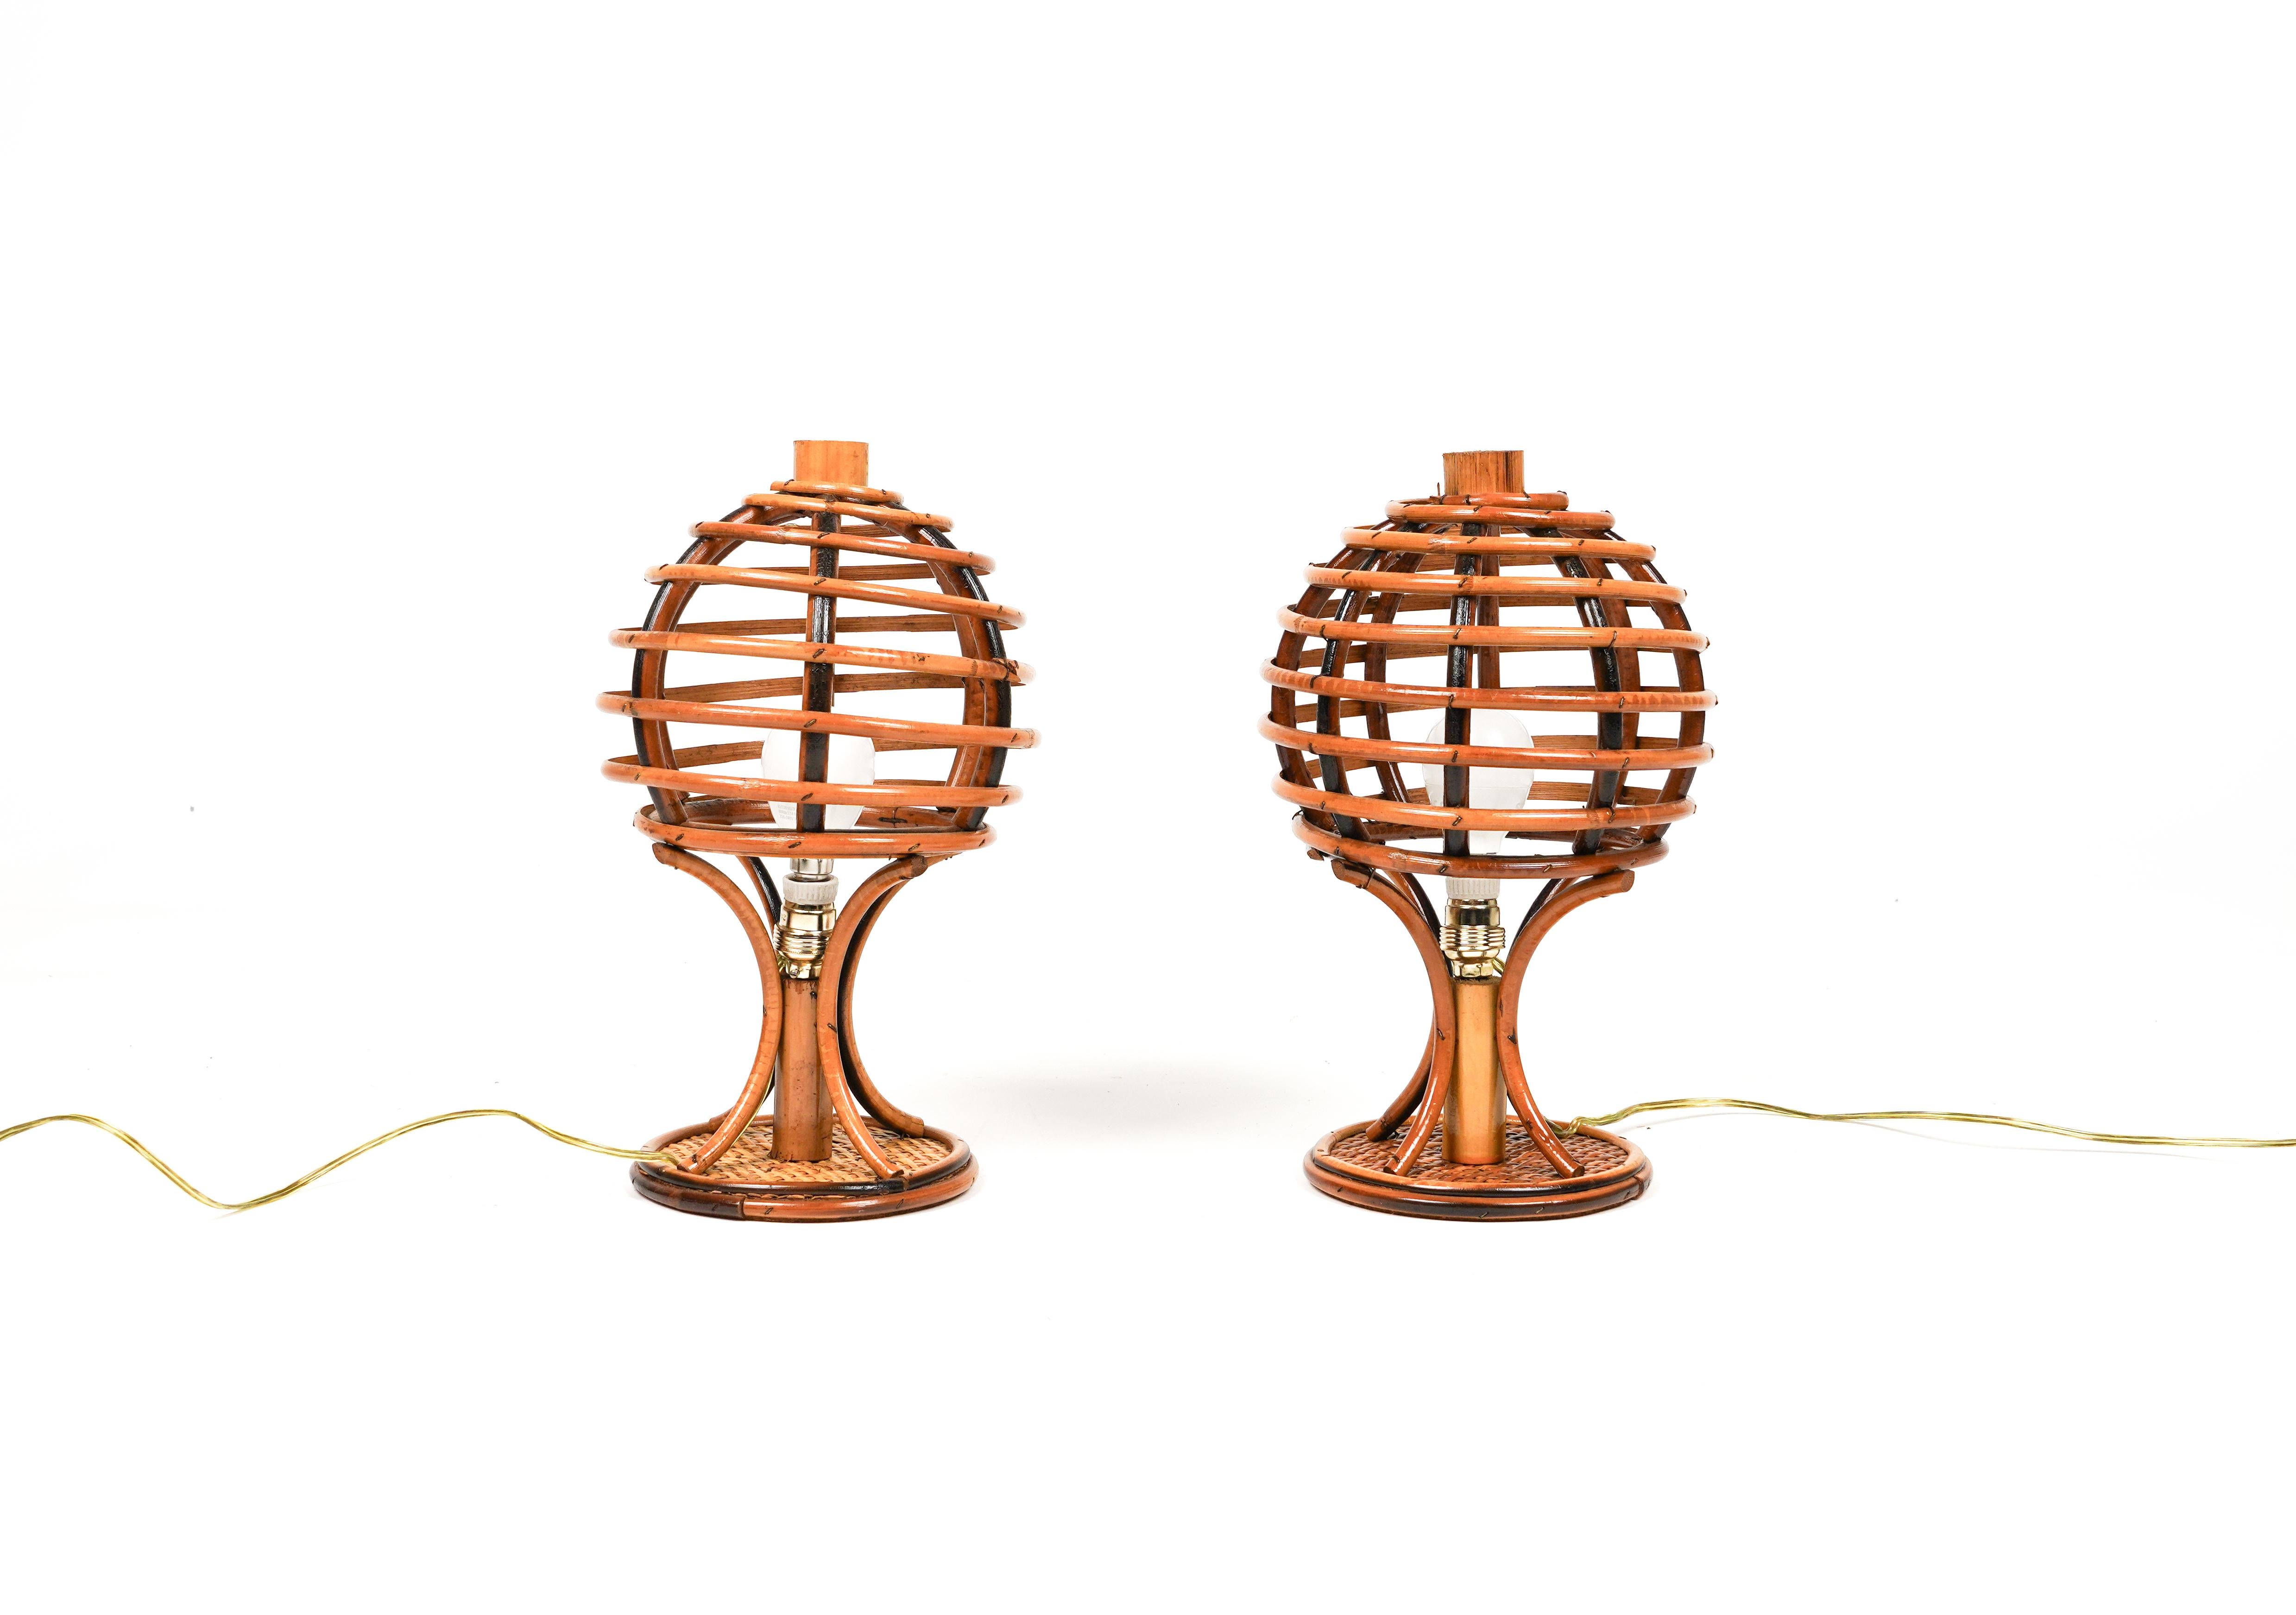 Midcentury Pair of Table Lamps Louis Sognot Style, Italy 1960s For Sale 6